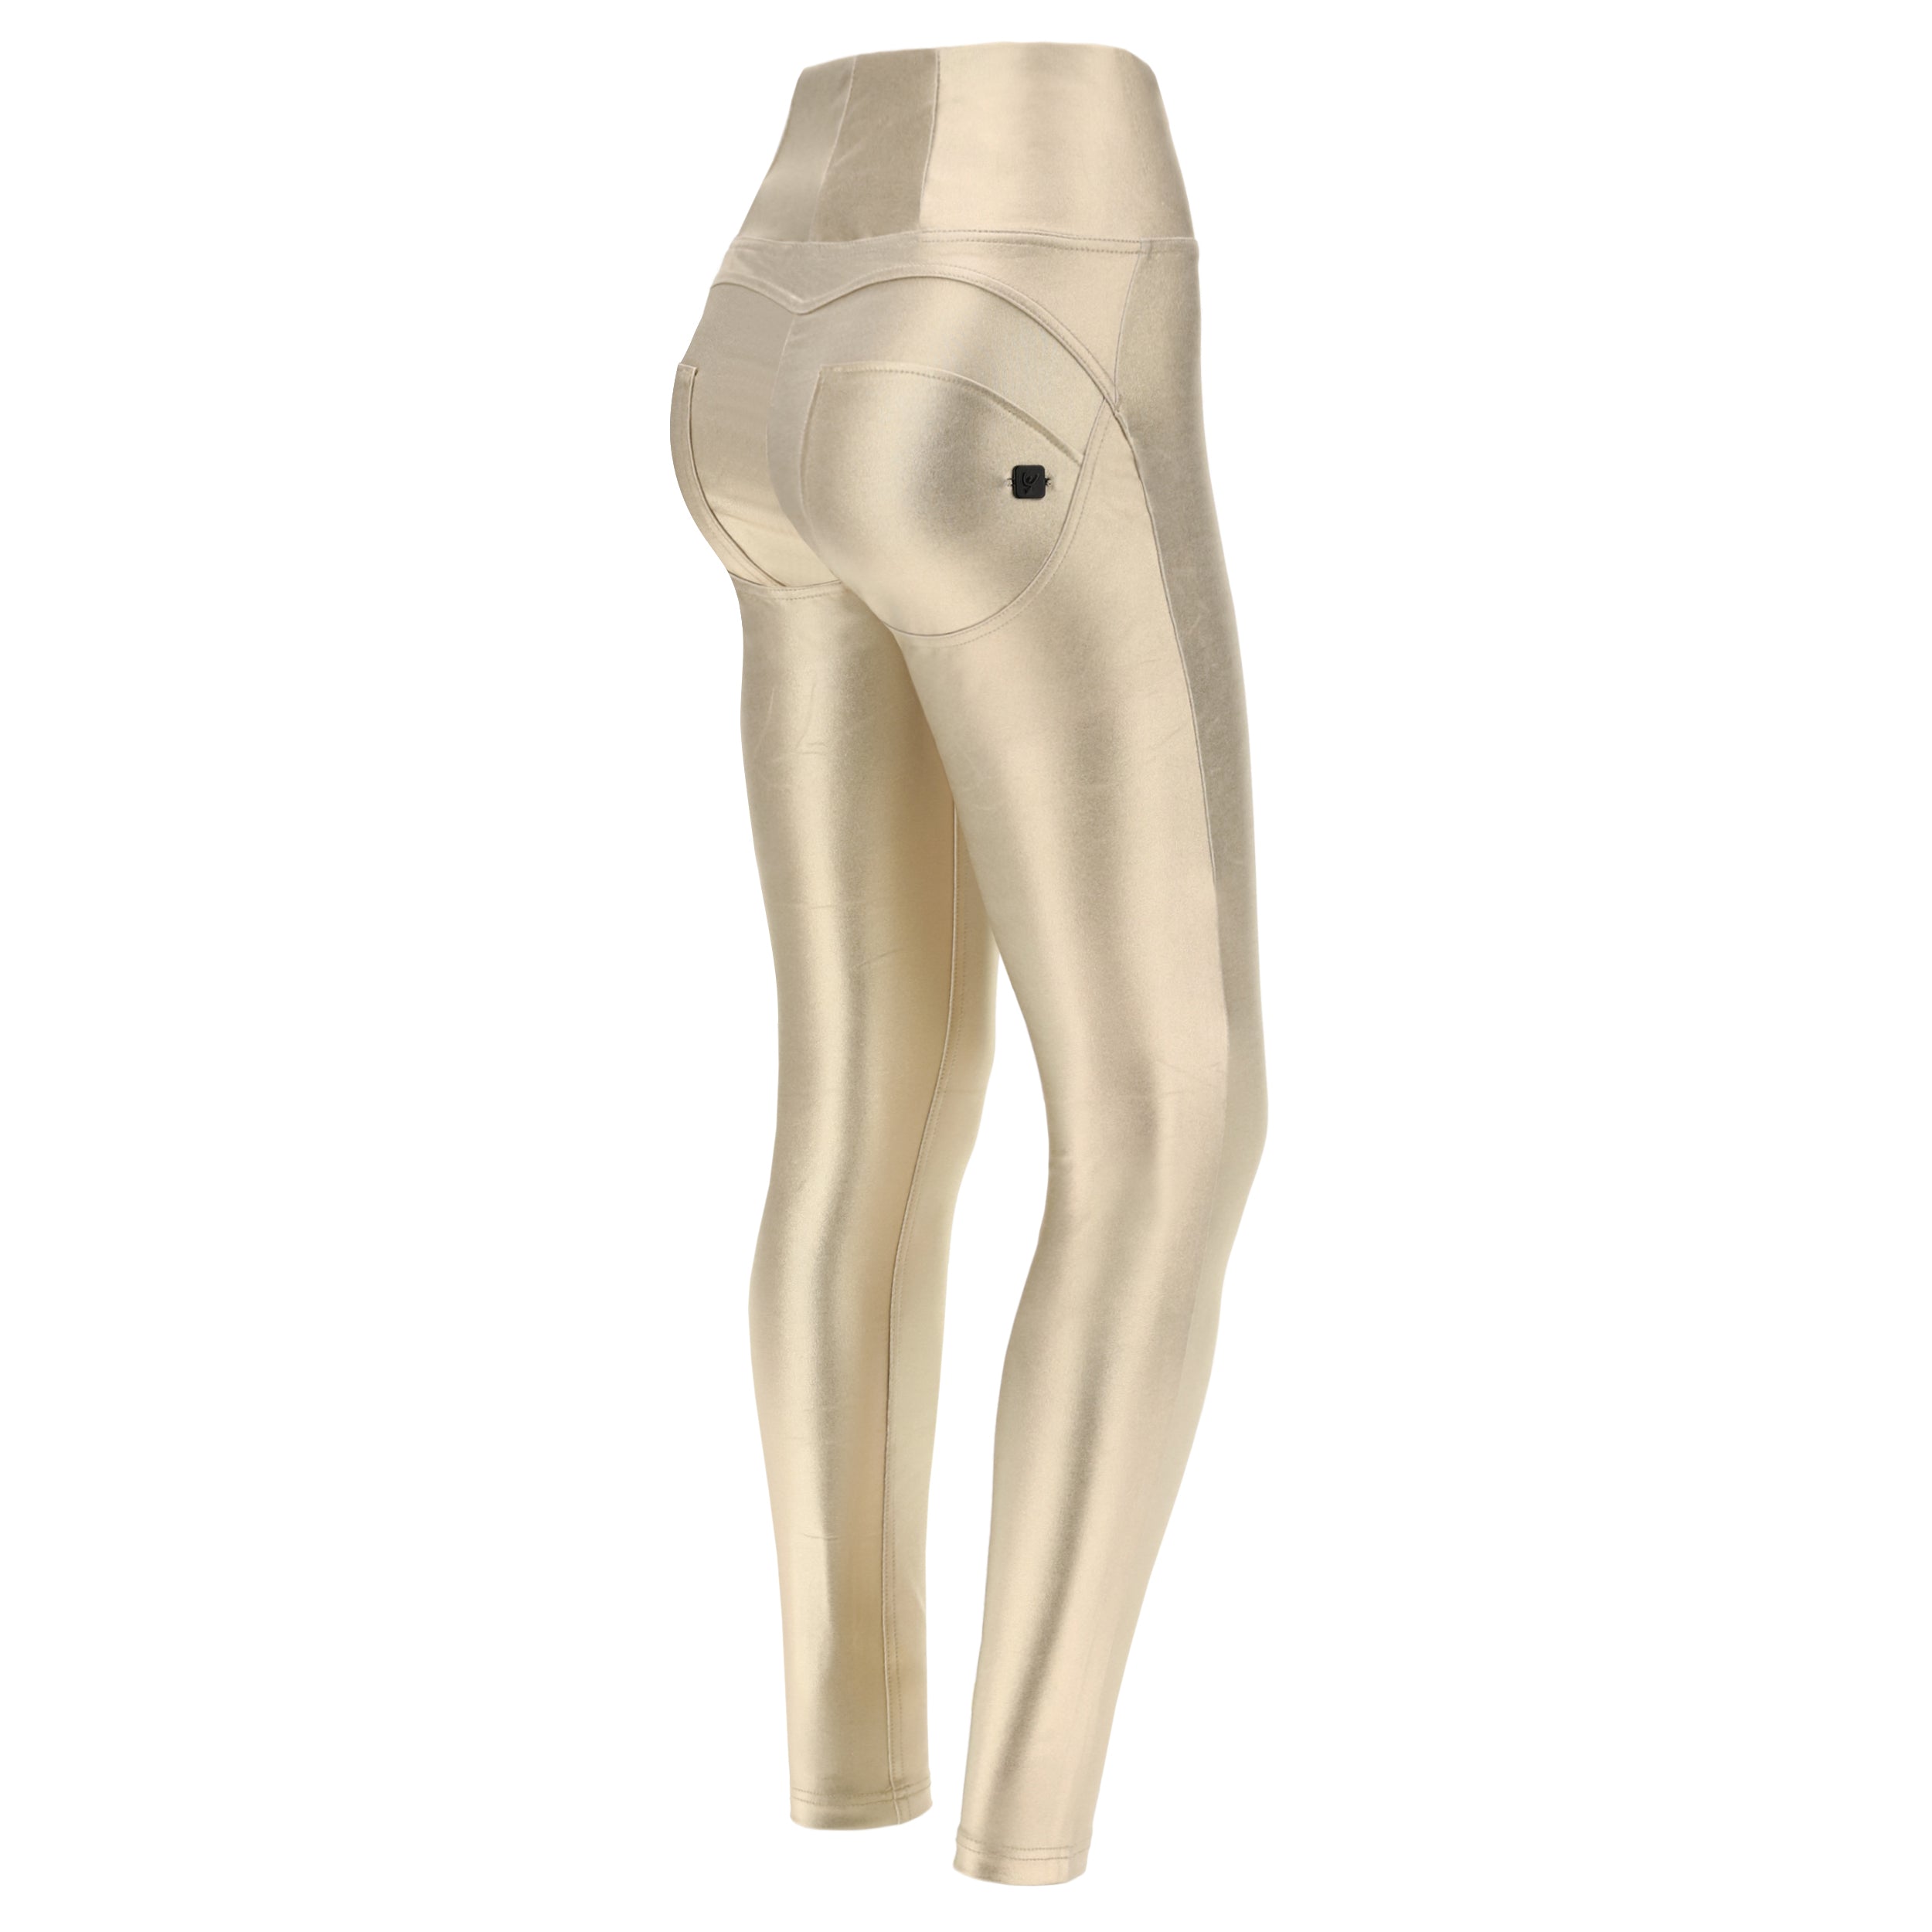 (WRUP1HF119-O13) High waist WR.UP® shaping trousers in coated metallic performance fabric